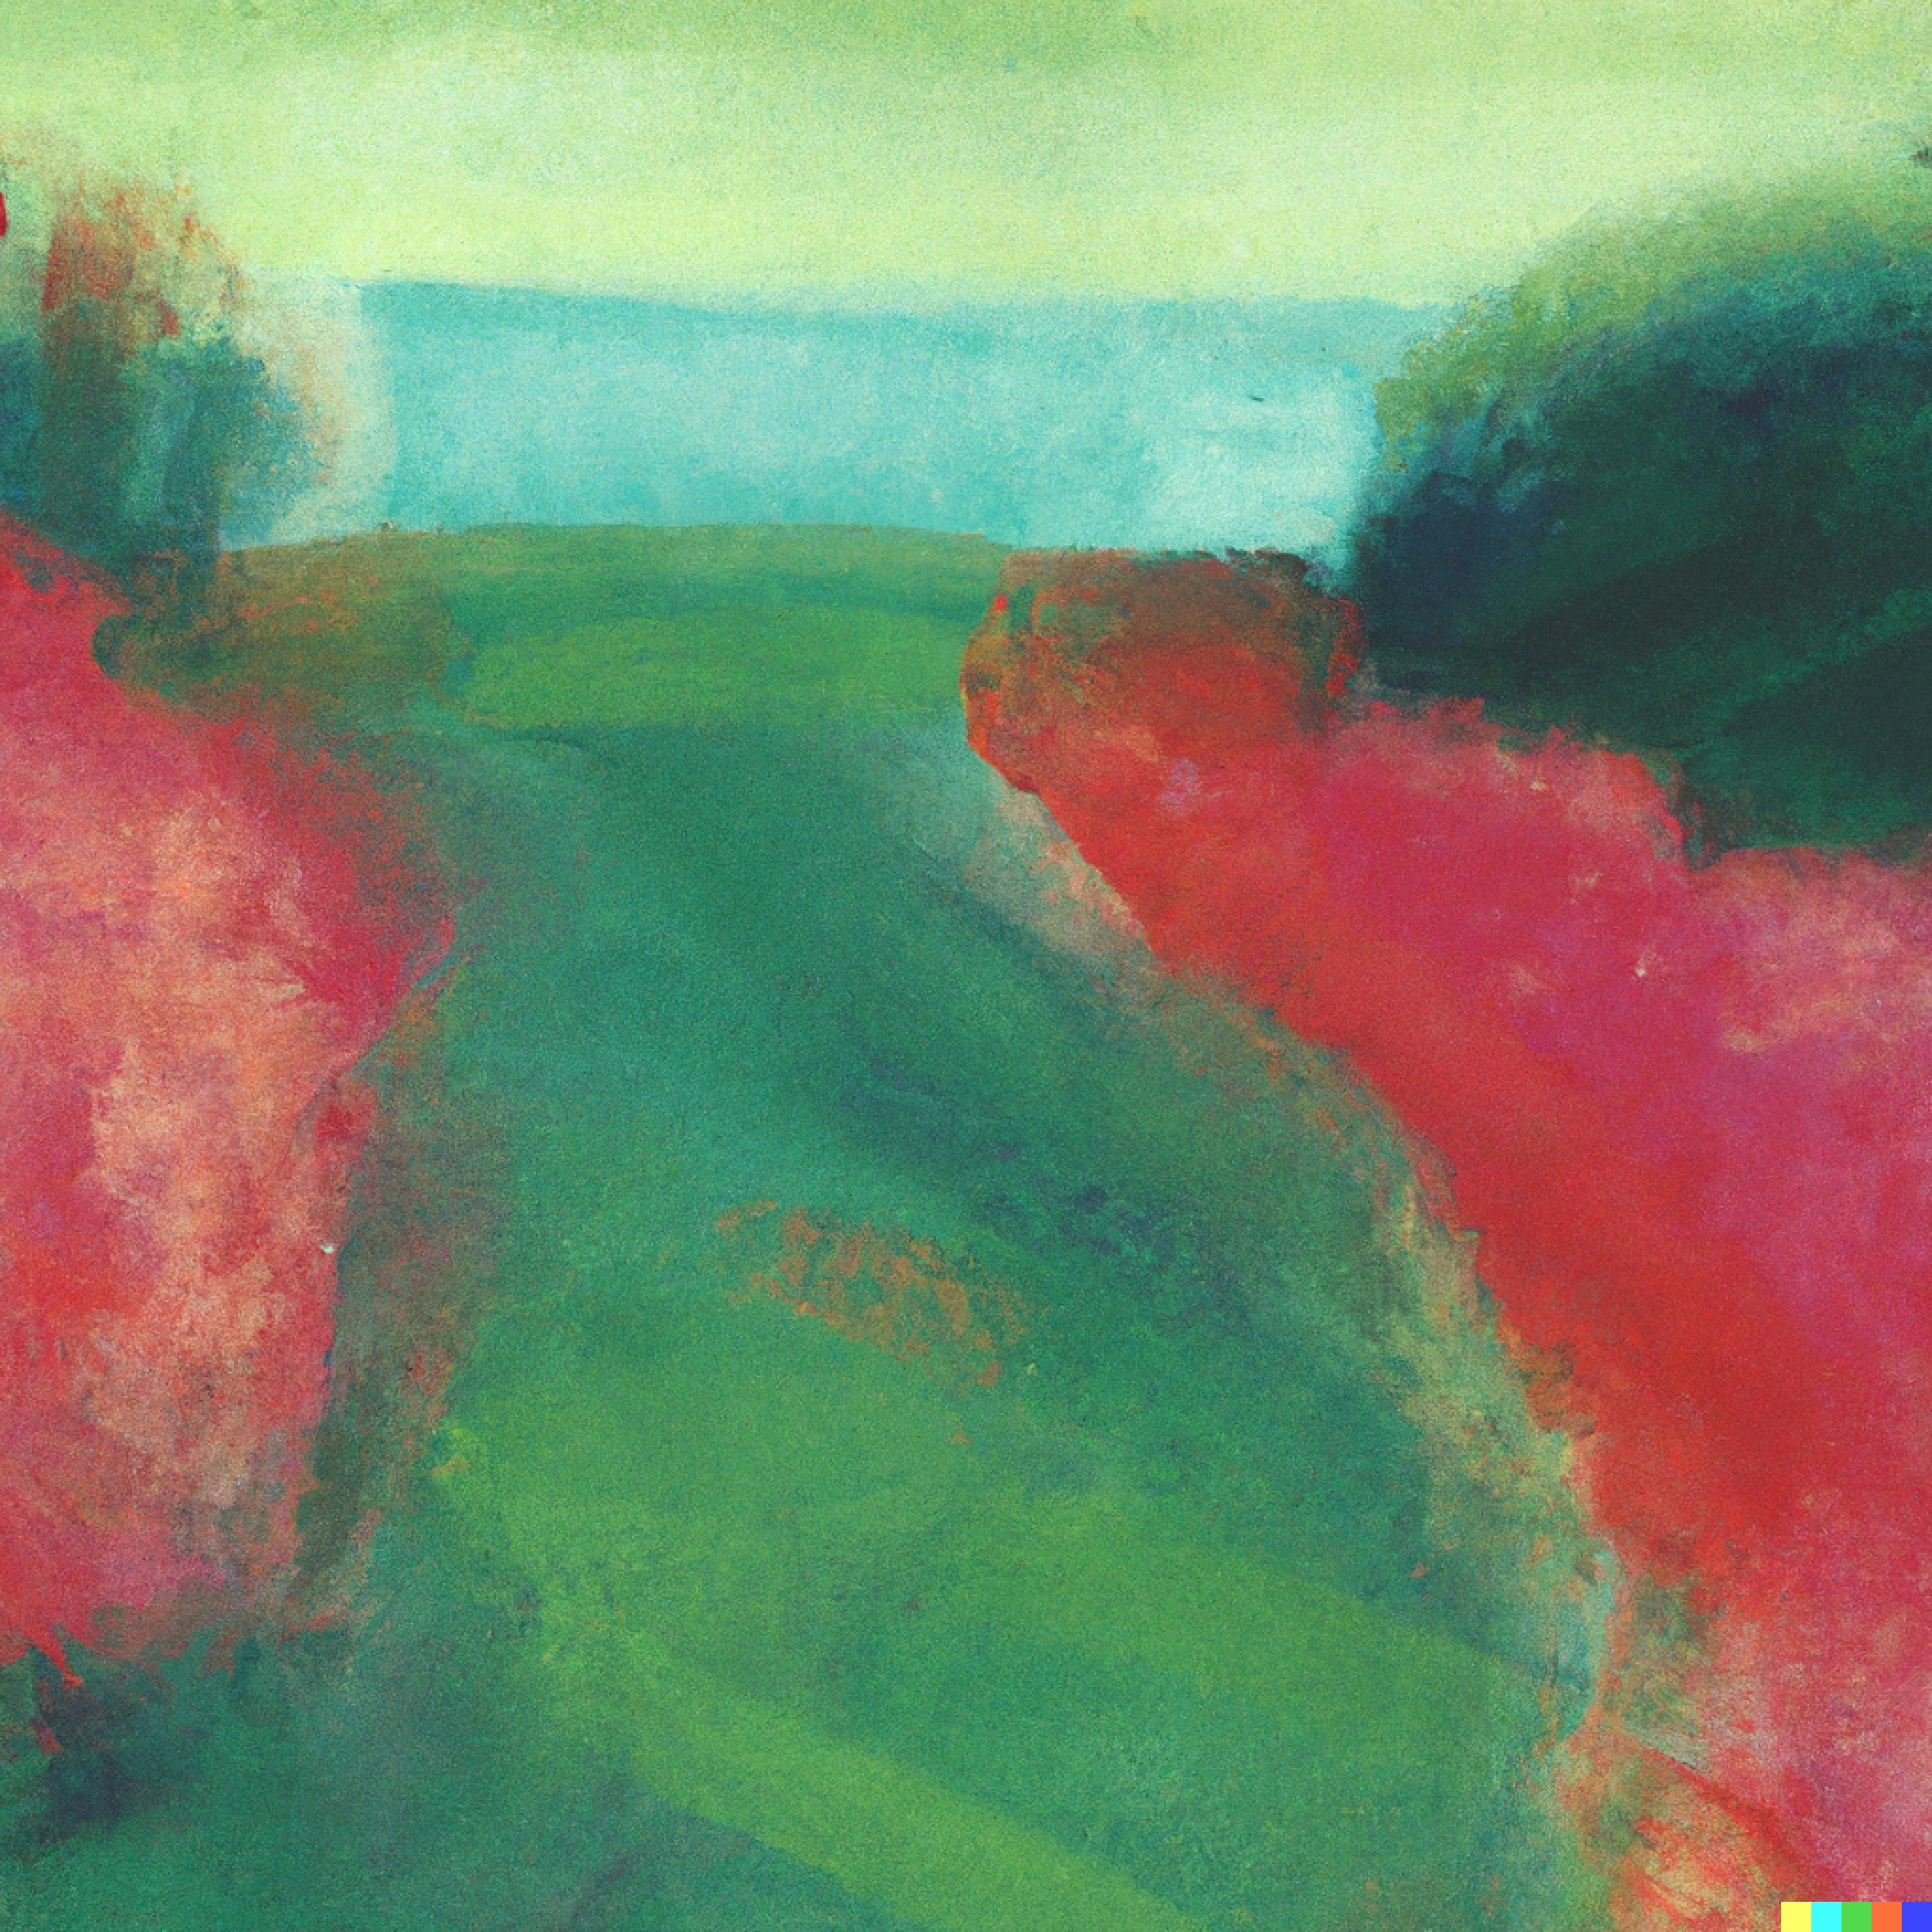 A textural, painterly image evoking a landscape in greens and reds.